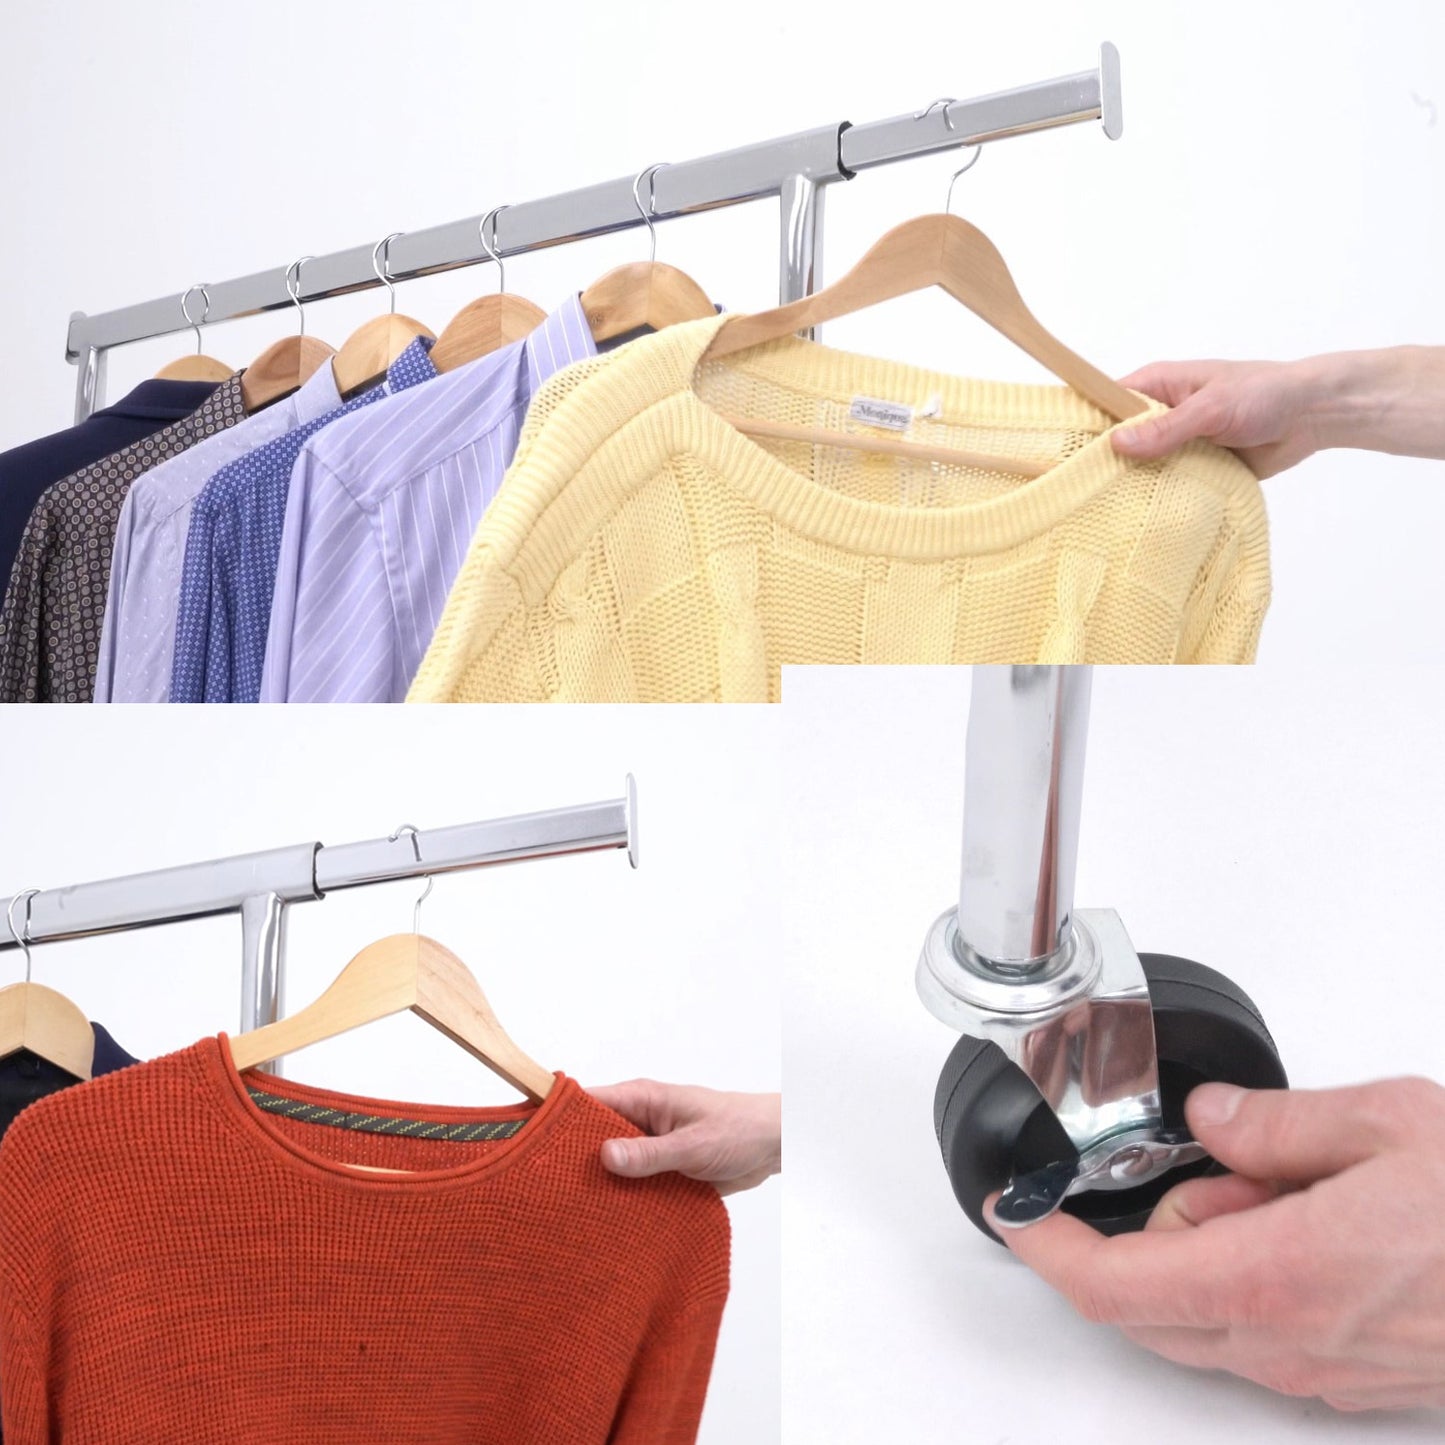 Tatkraft Didrik - Heavy Duty Clothes Rail, Clothes Rail on Wheels, Clothing Rail for Hanging Clothes, Holds Up to 286 Lbs (130 kg), Chromed steel